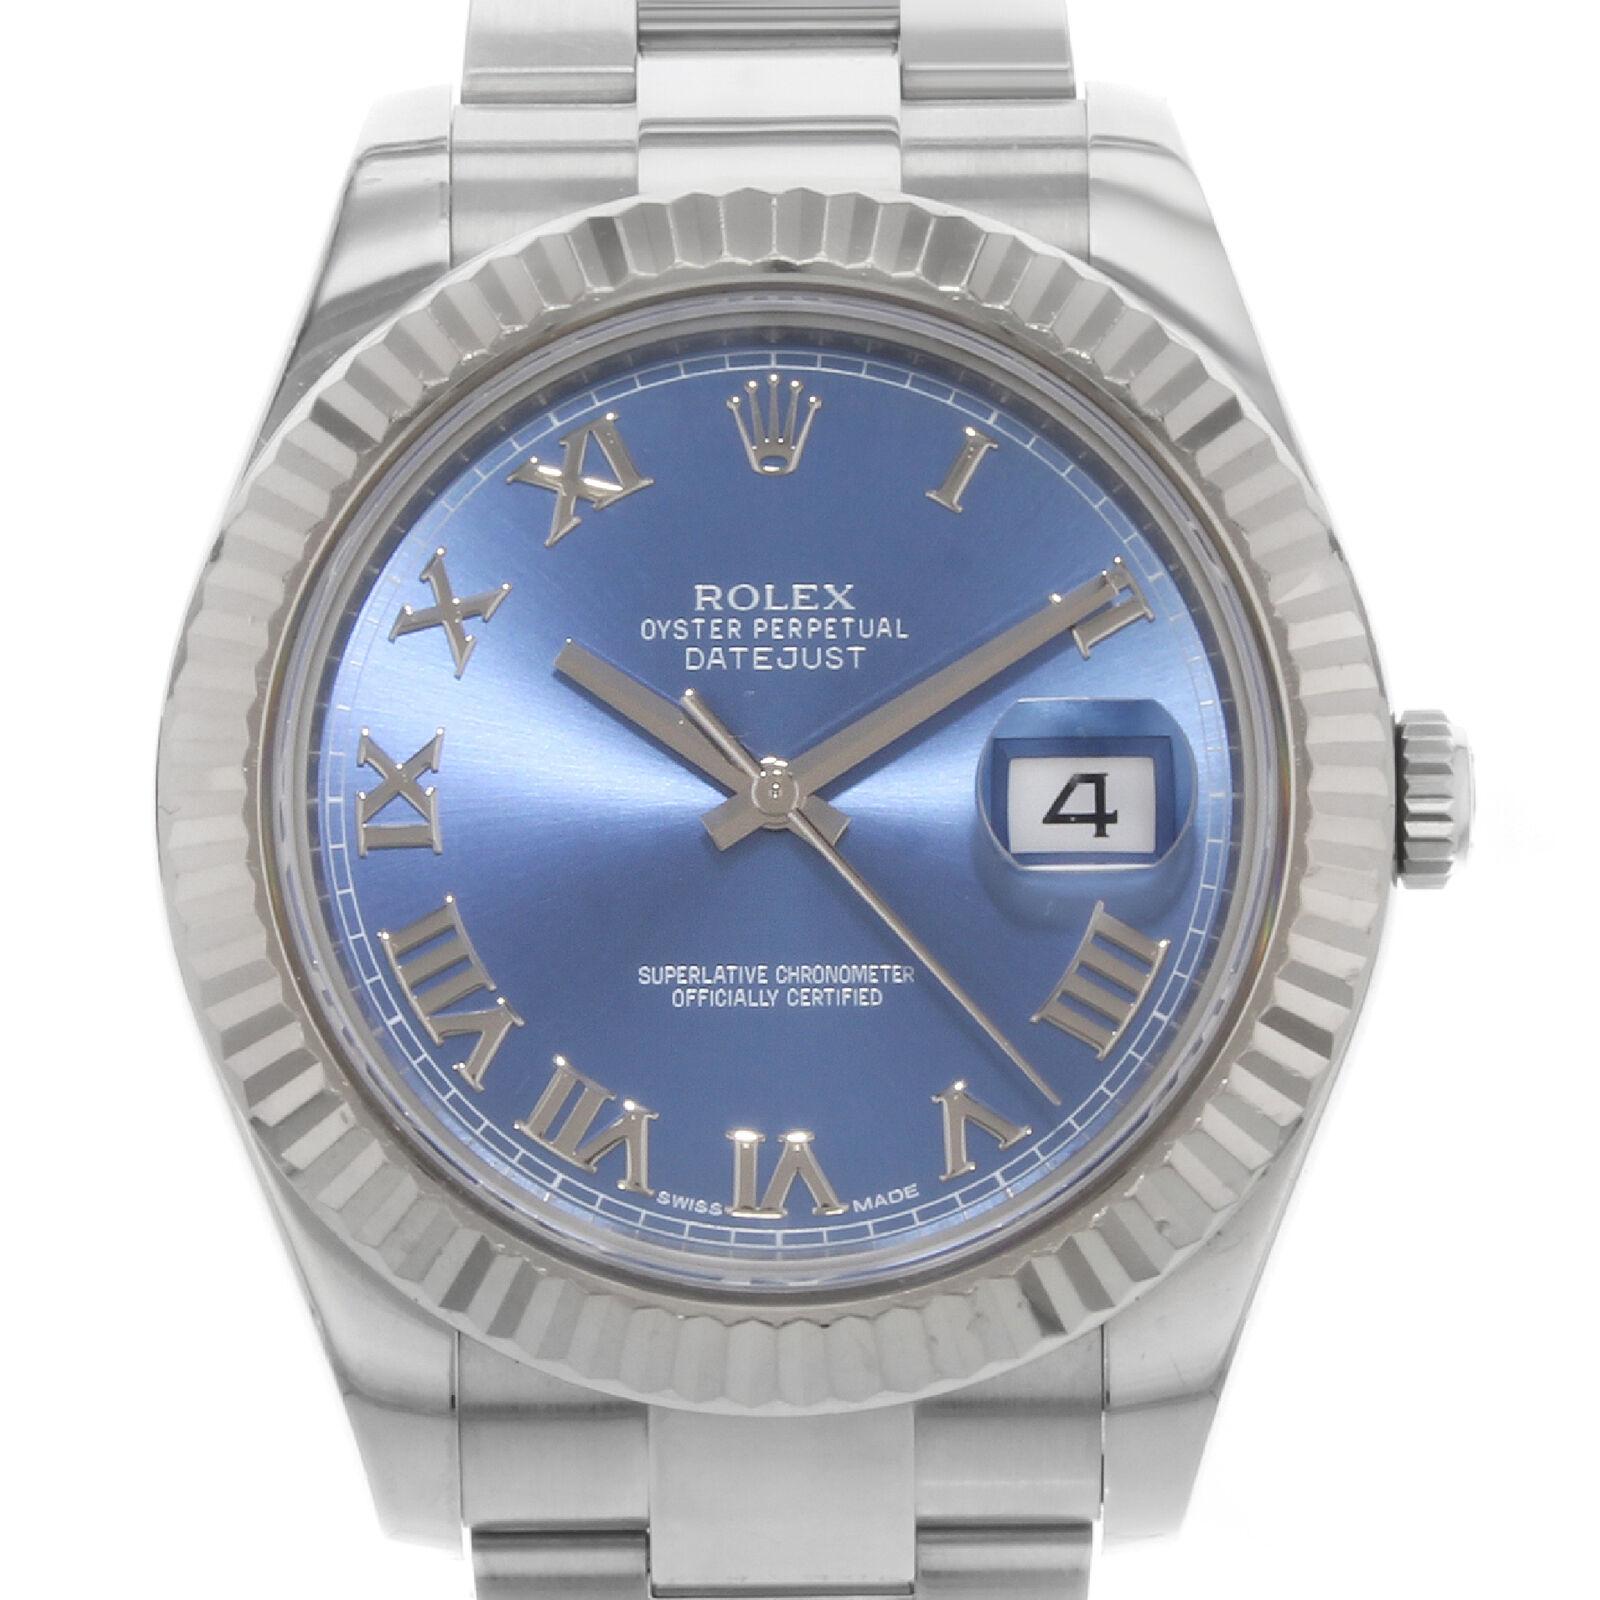 This pre-owned Rolex Datejust II 116334 blro is a beautiful men's timepiece that is powered by an automatic movement which is cased in a stainless steel case. It has a round shape face, date dial and has hand roman numerals style markers. It is